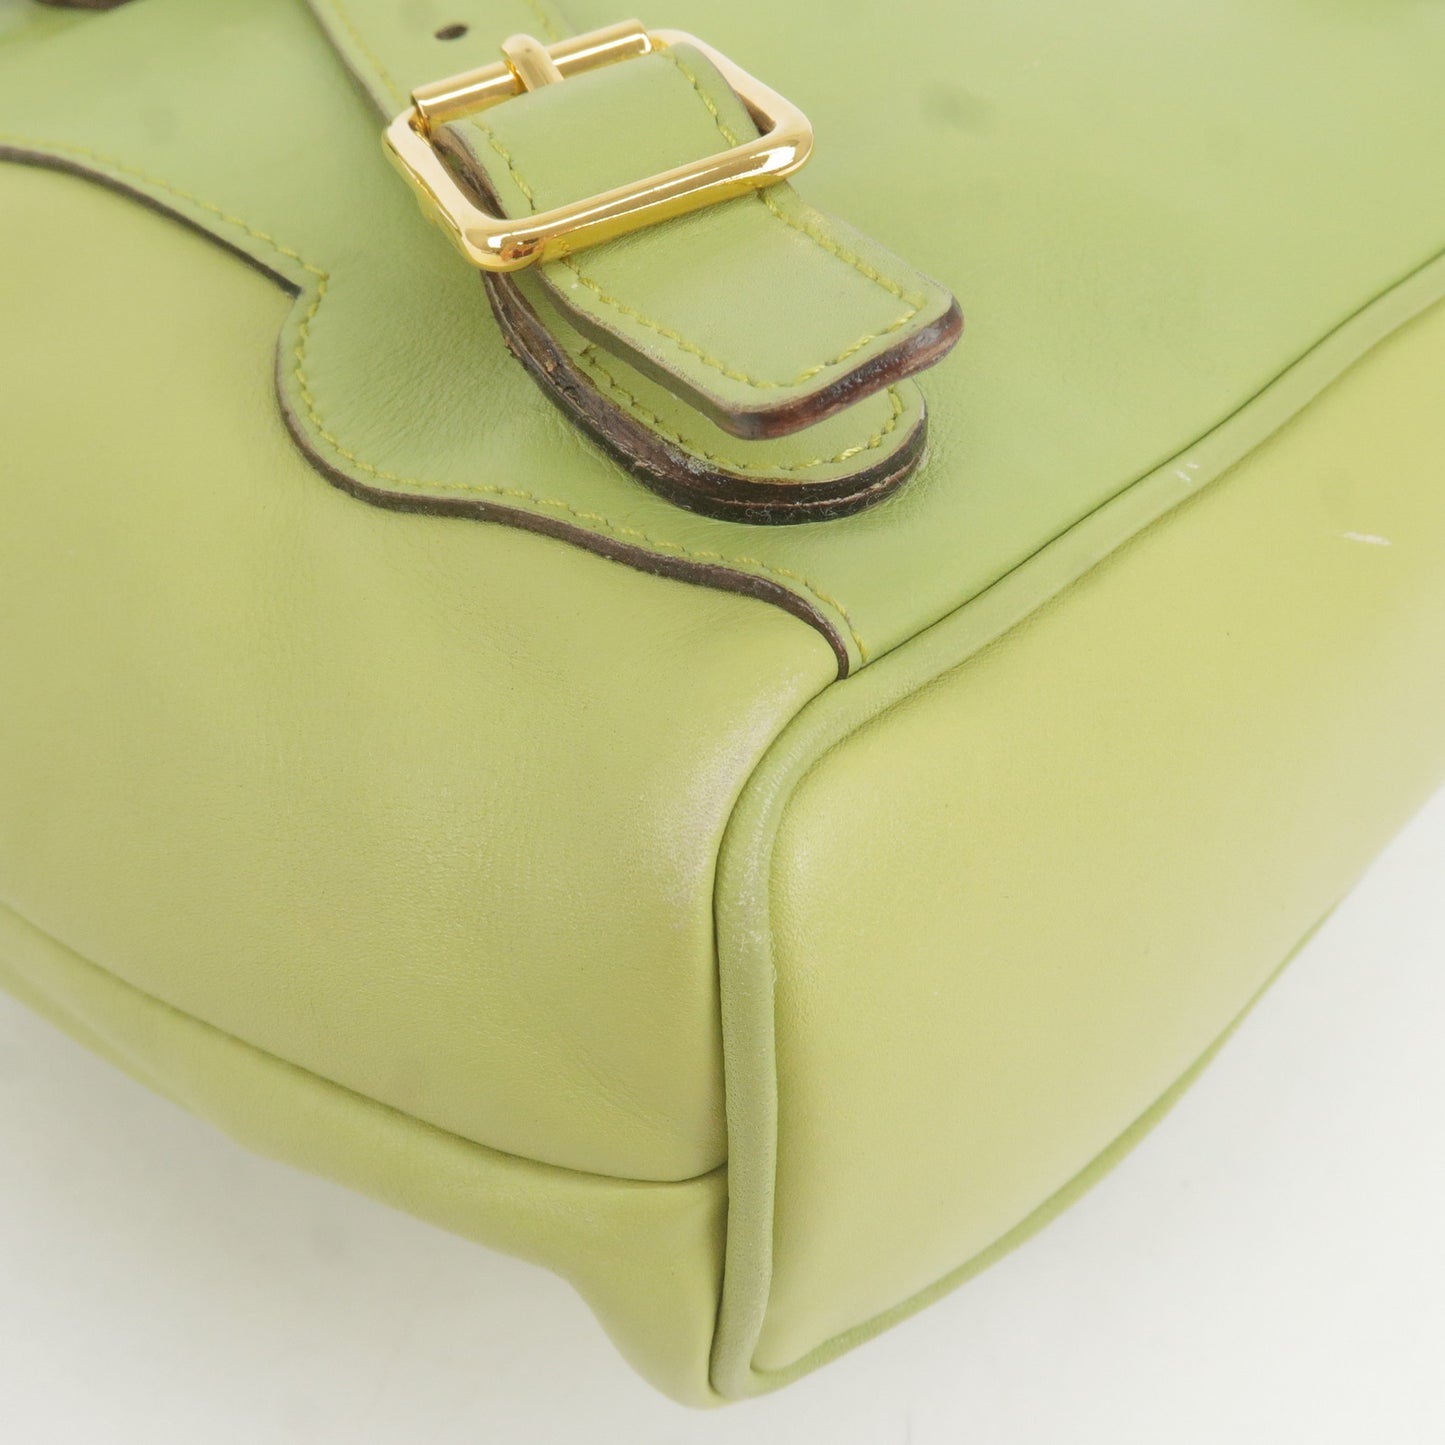 GUCCI Bamboo Leather Back Pack Green 003･2058･0030